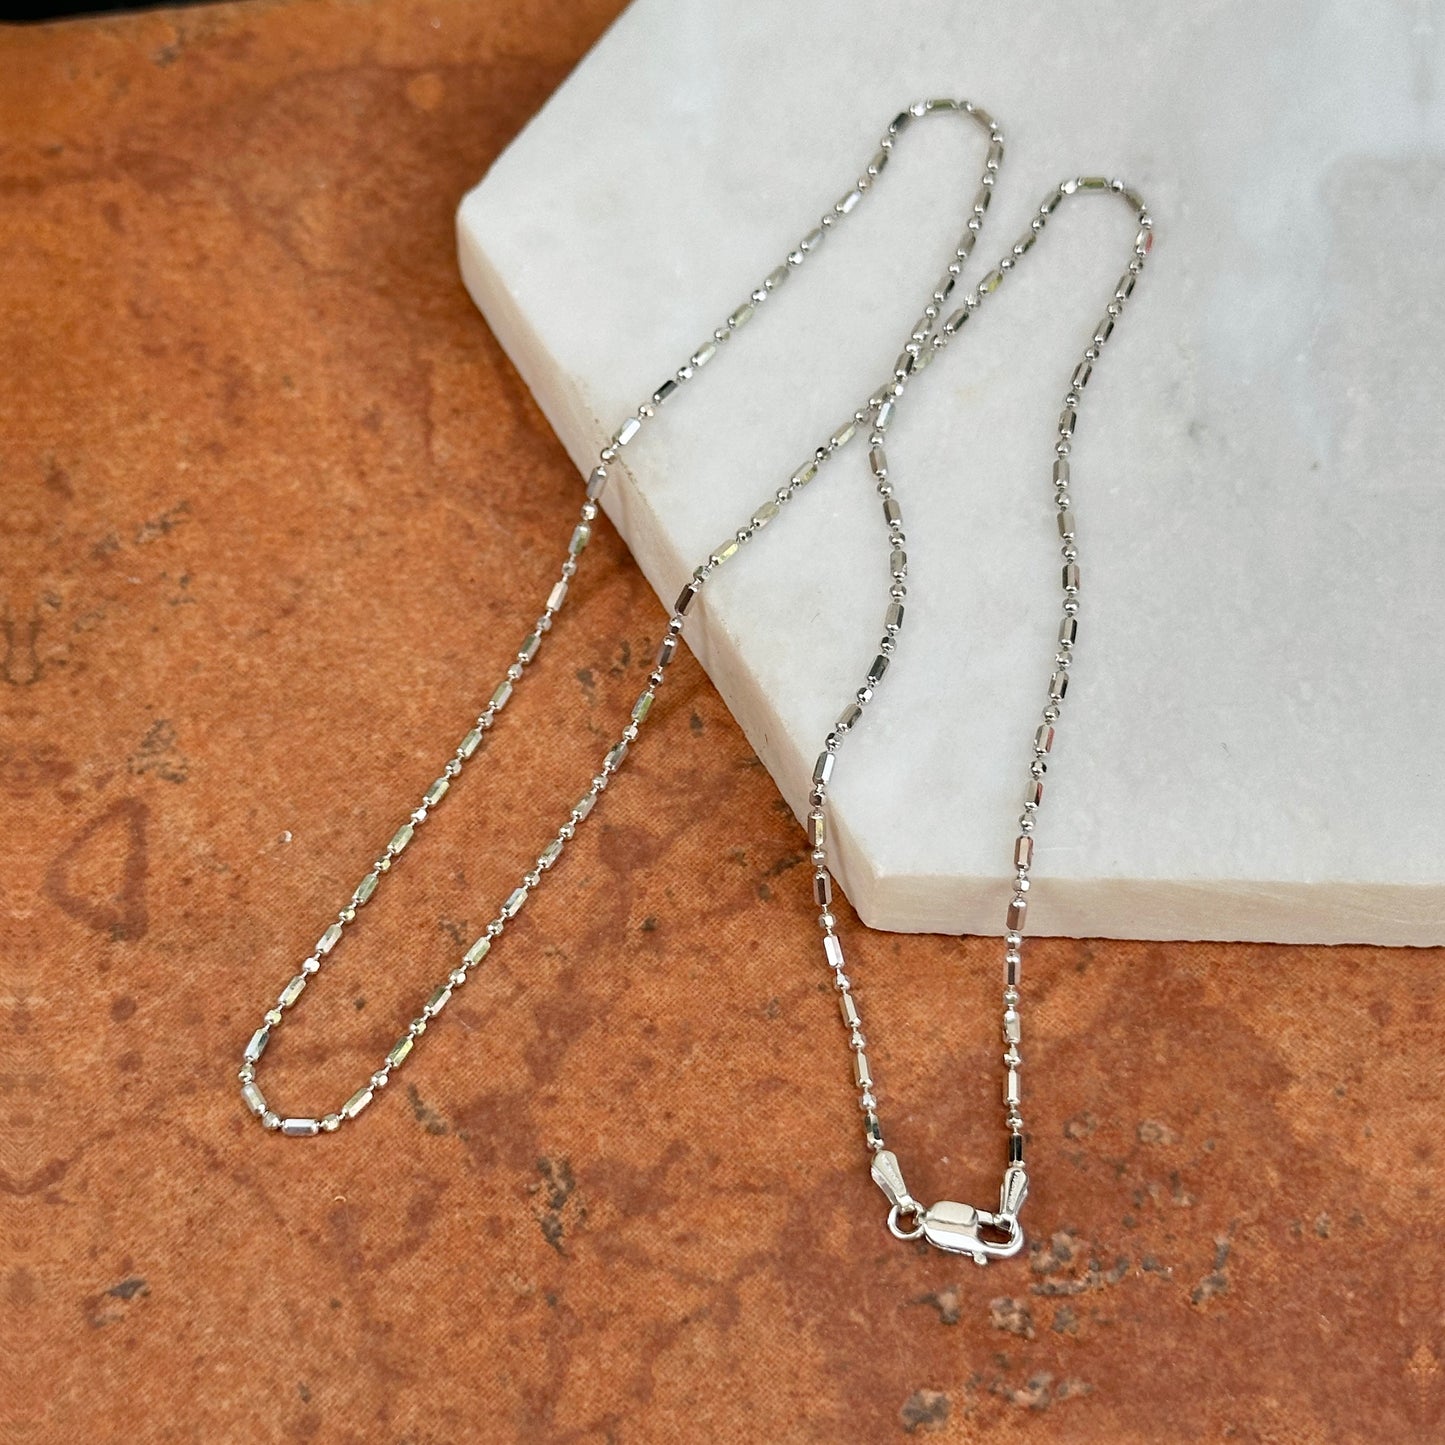 14KT White Gold Alternating Bead Chain Necklace